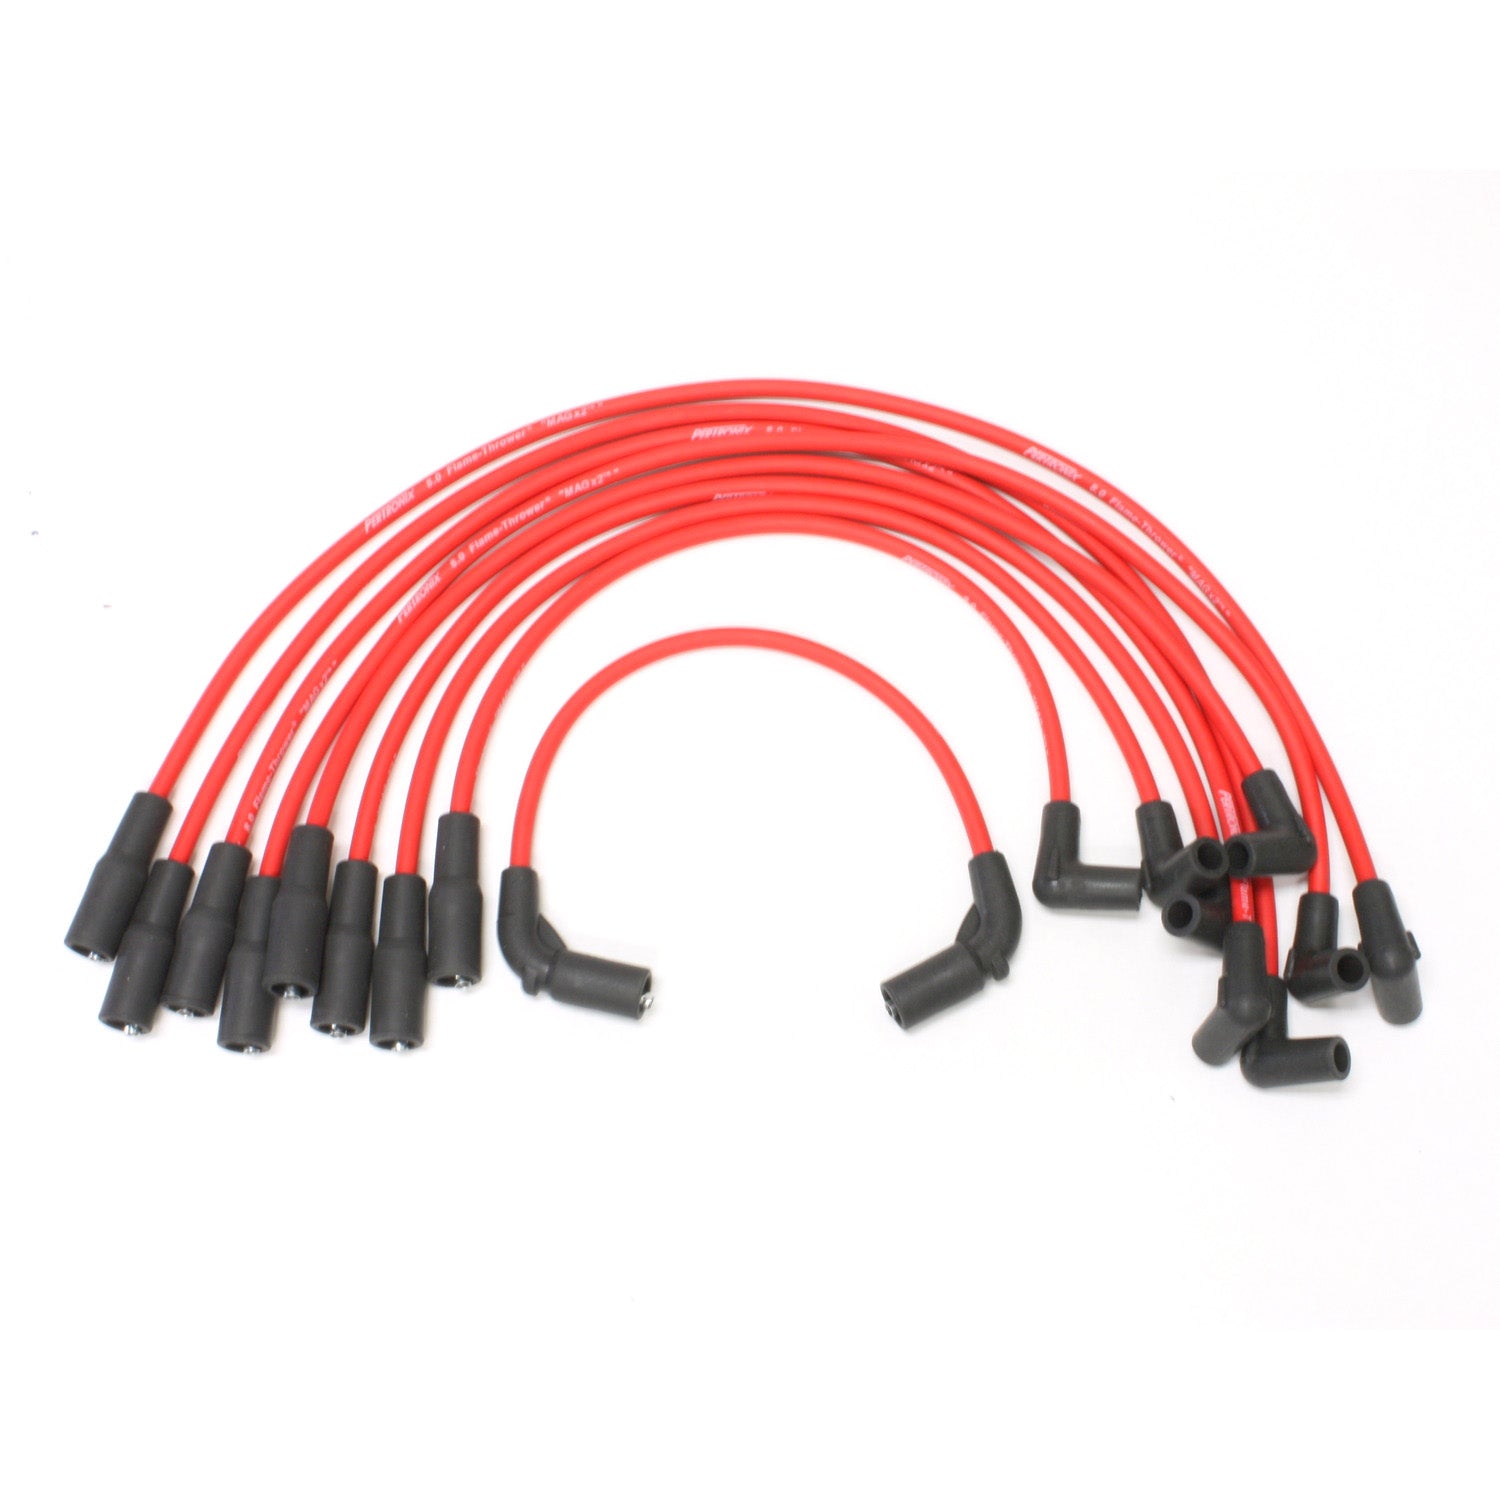 PerTronix 808424 Flame-Thrower Spark Plug Wires 8 cyl 8mm 1996-99 GM Truck 5.0/5.7L Red